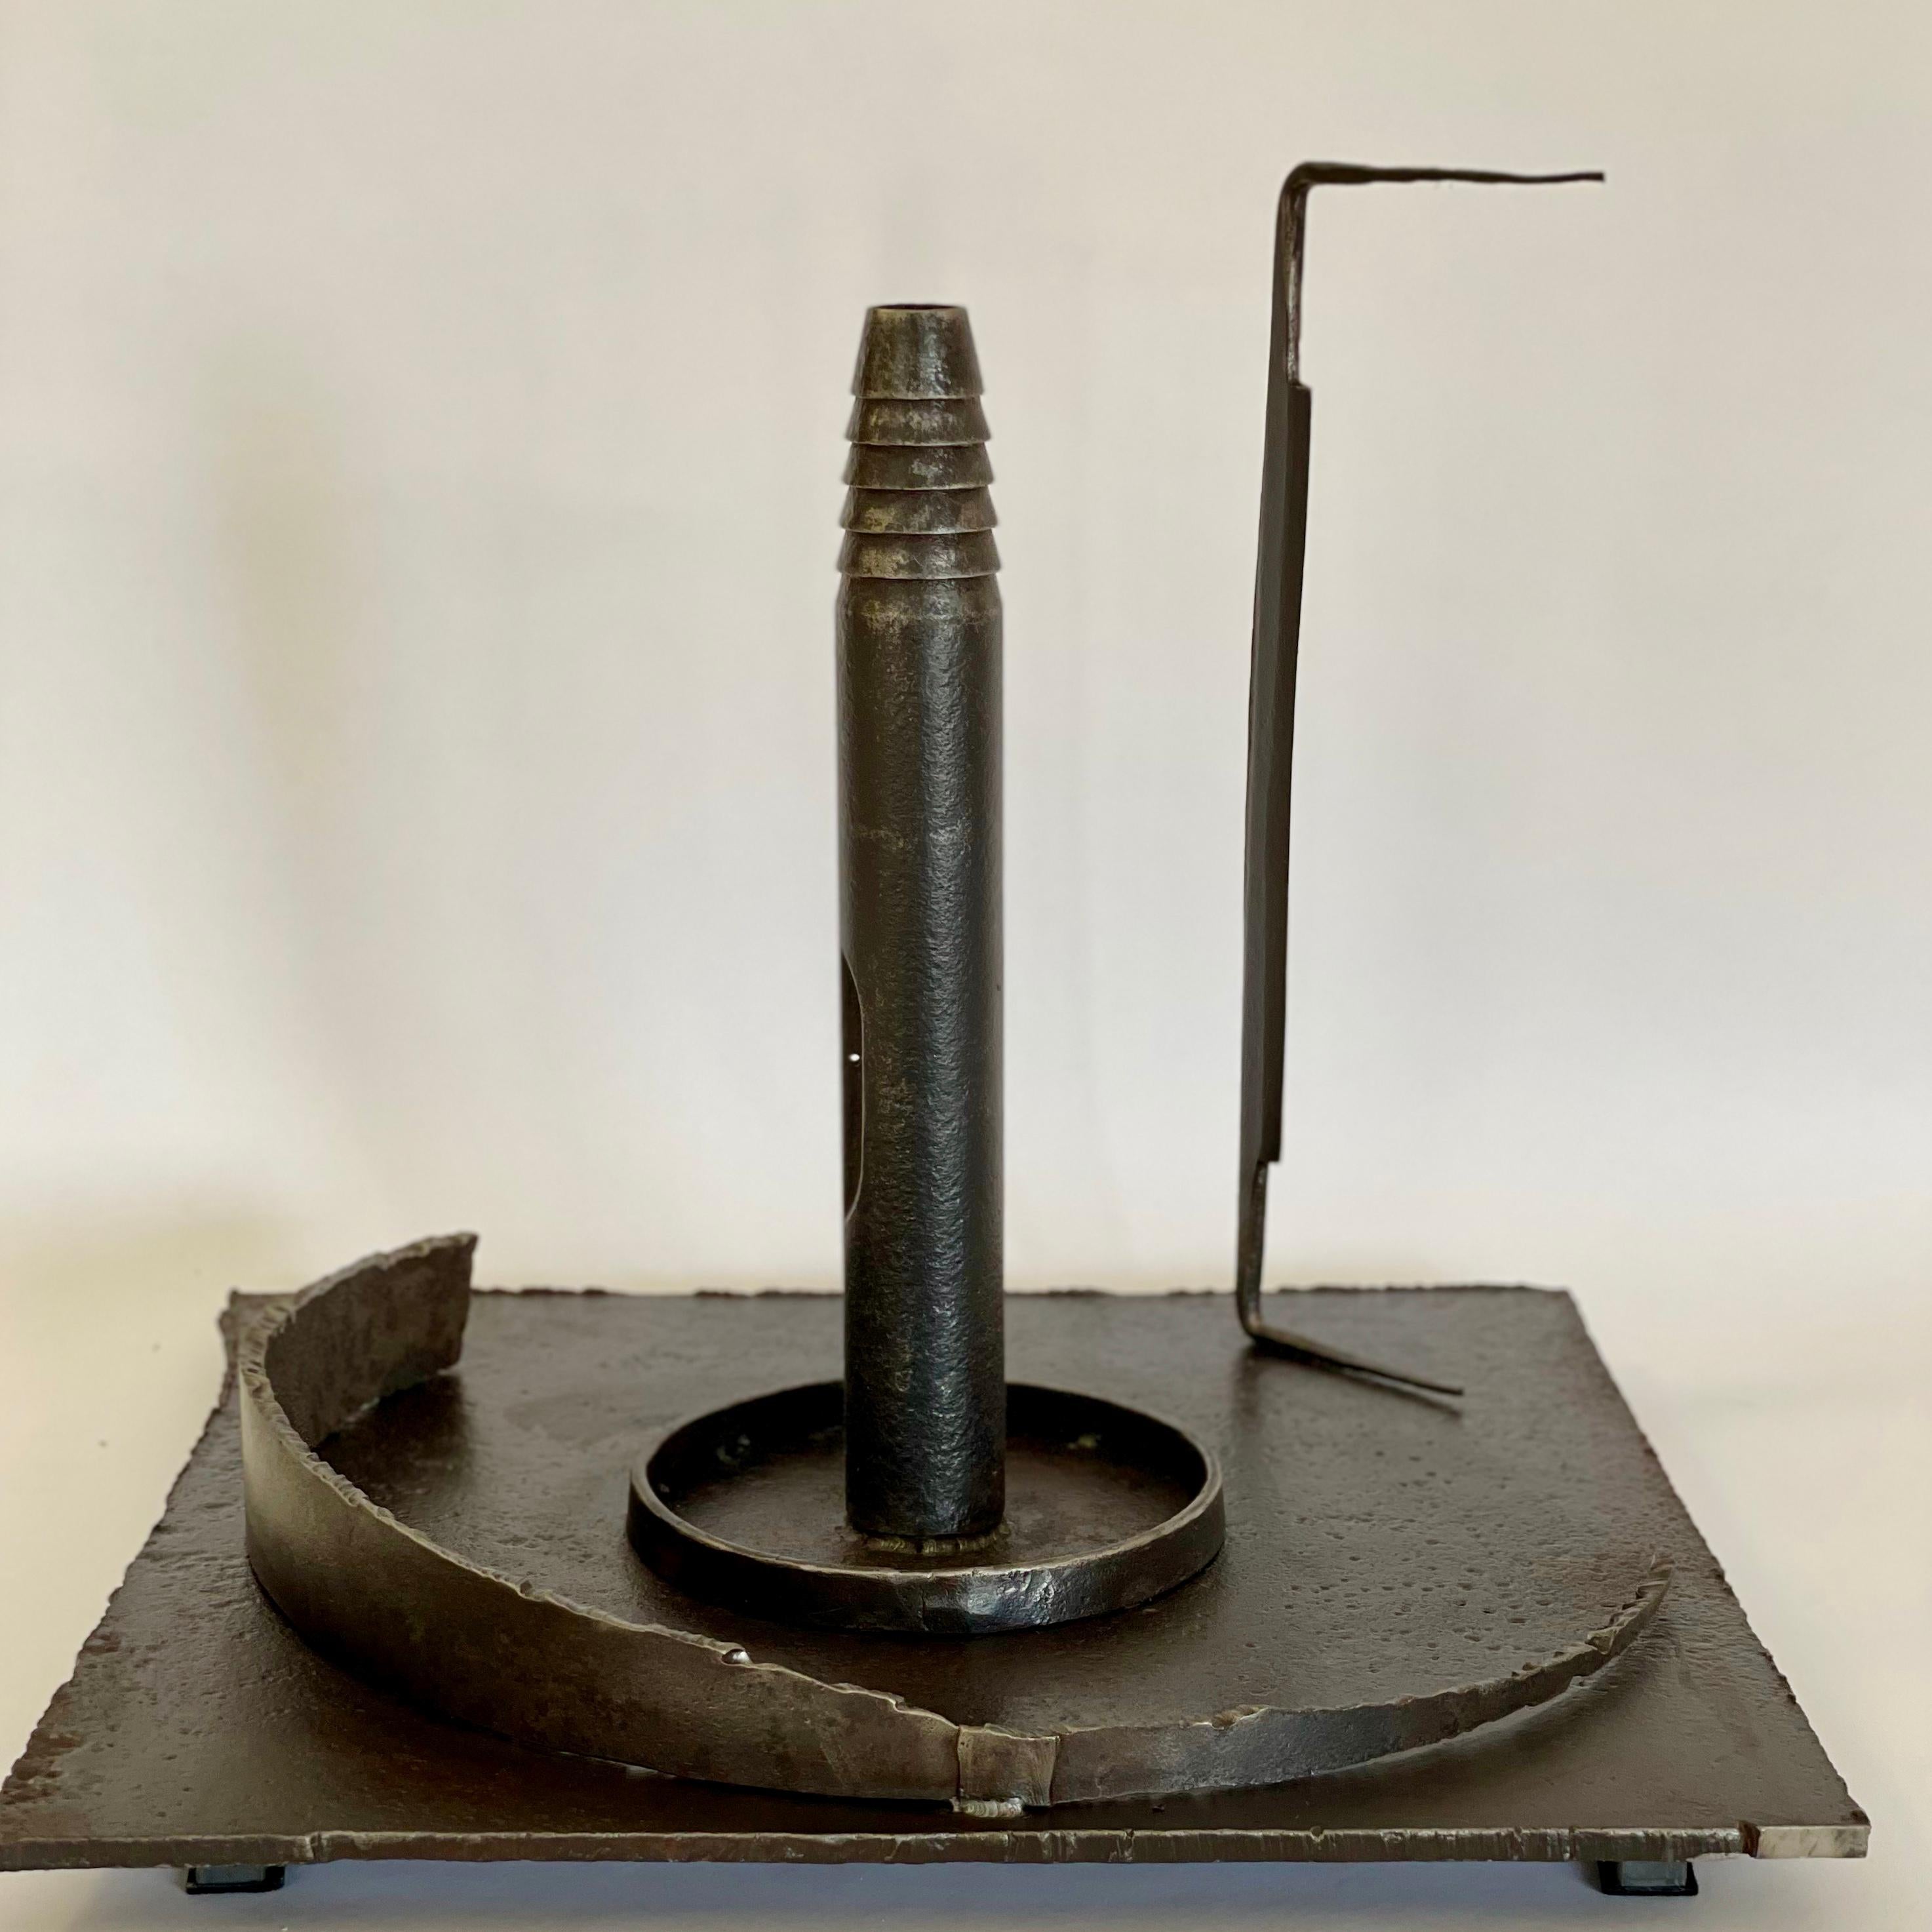 Odyssey
welded steel
Measures: 18.5 x 19 x 18 in.

Artist statement:

I seldom use stock material, but prefer distressed and rusted steel that has been scarred, bent, and made imperfect. In this state, the material becomes quite beautiful.